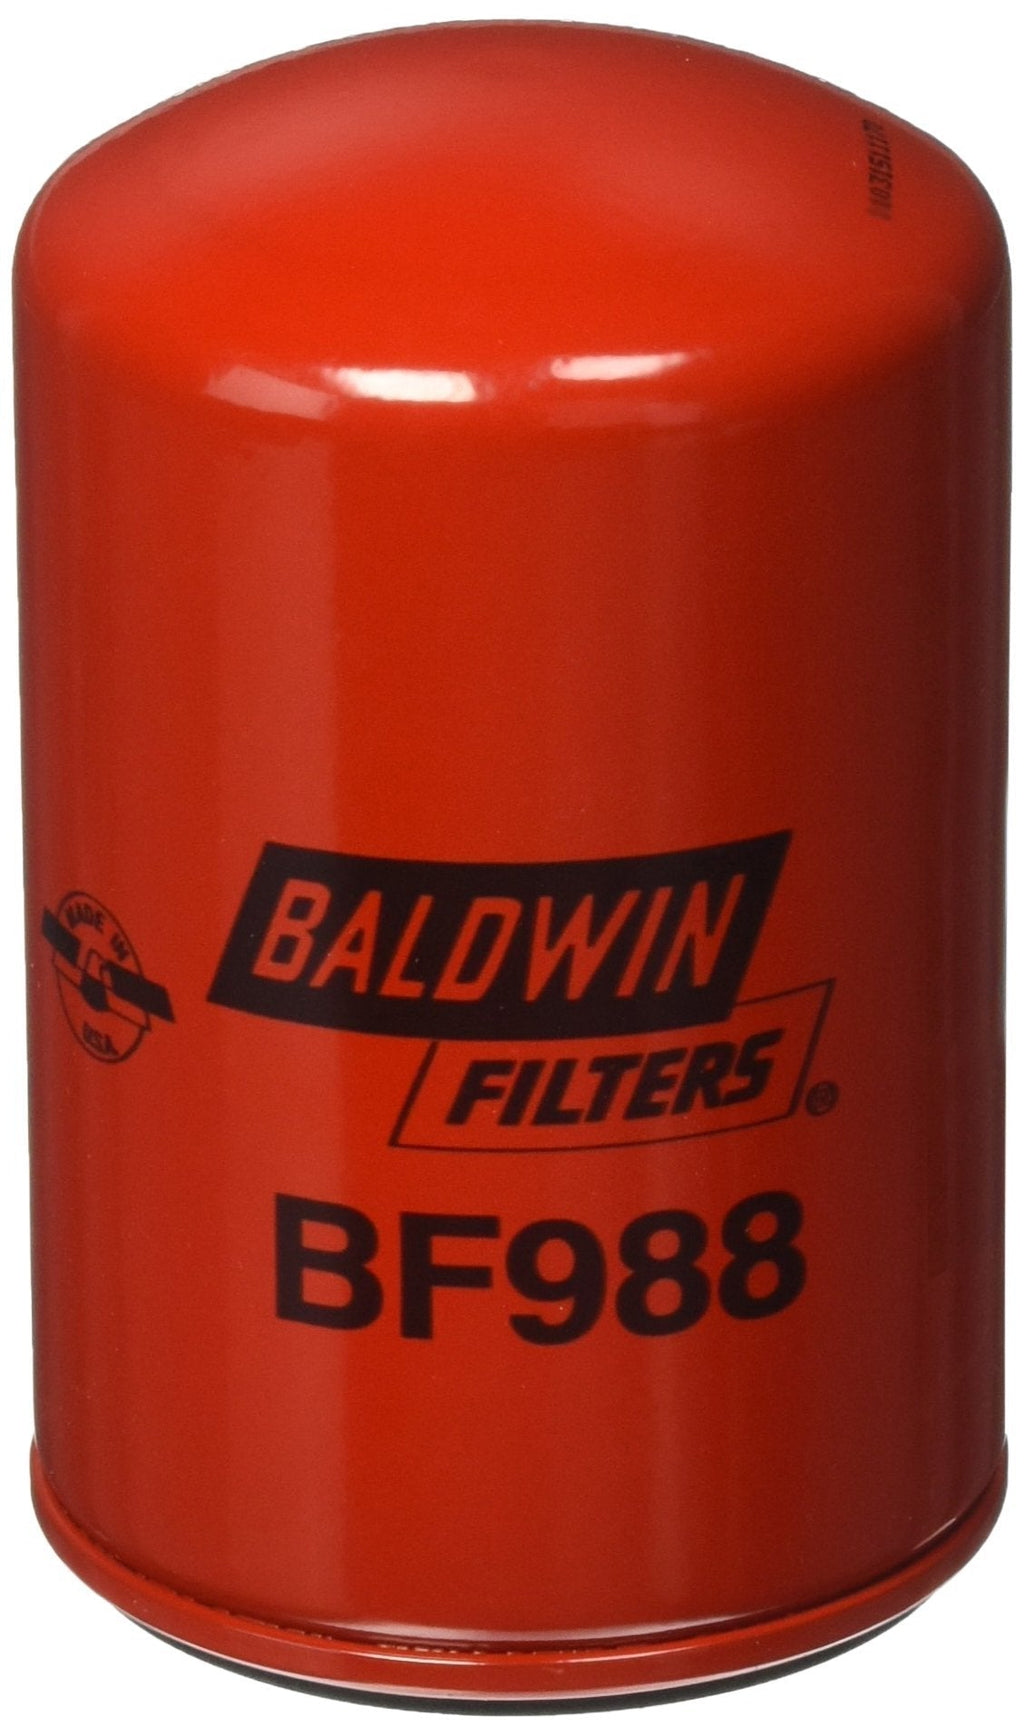  [AUSTRALIA] - Baldwin BF988 Fuel Spin-on, Red